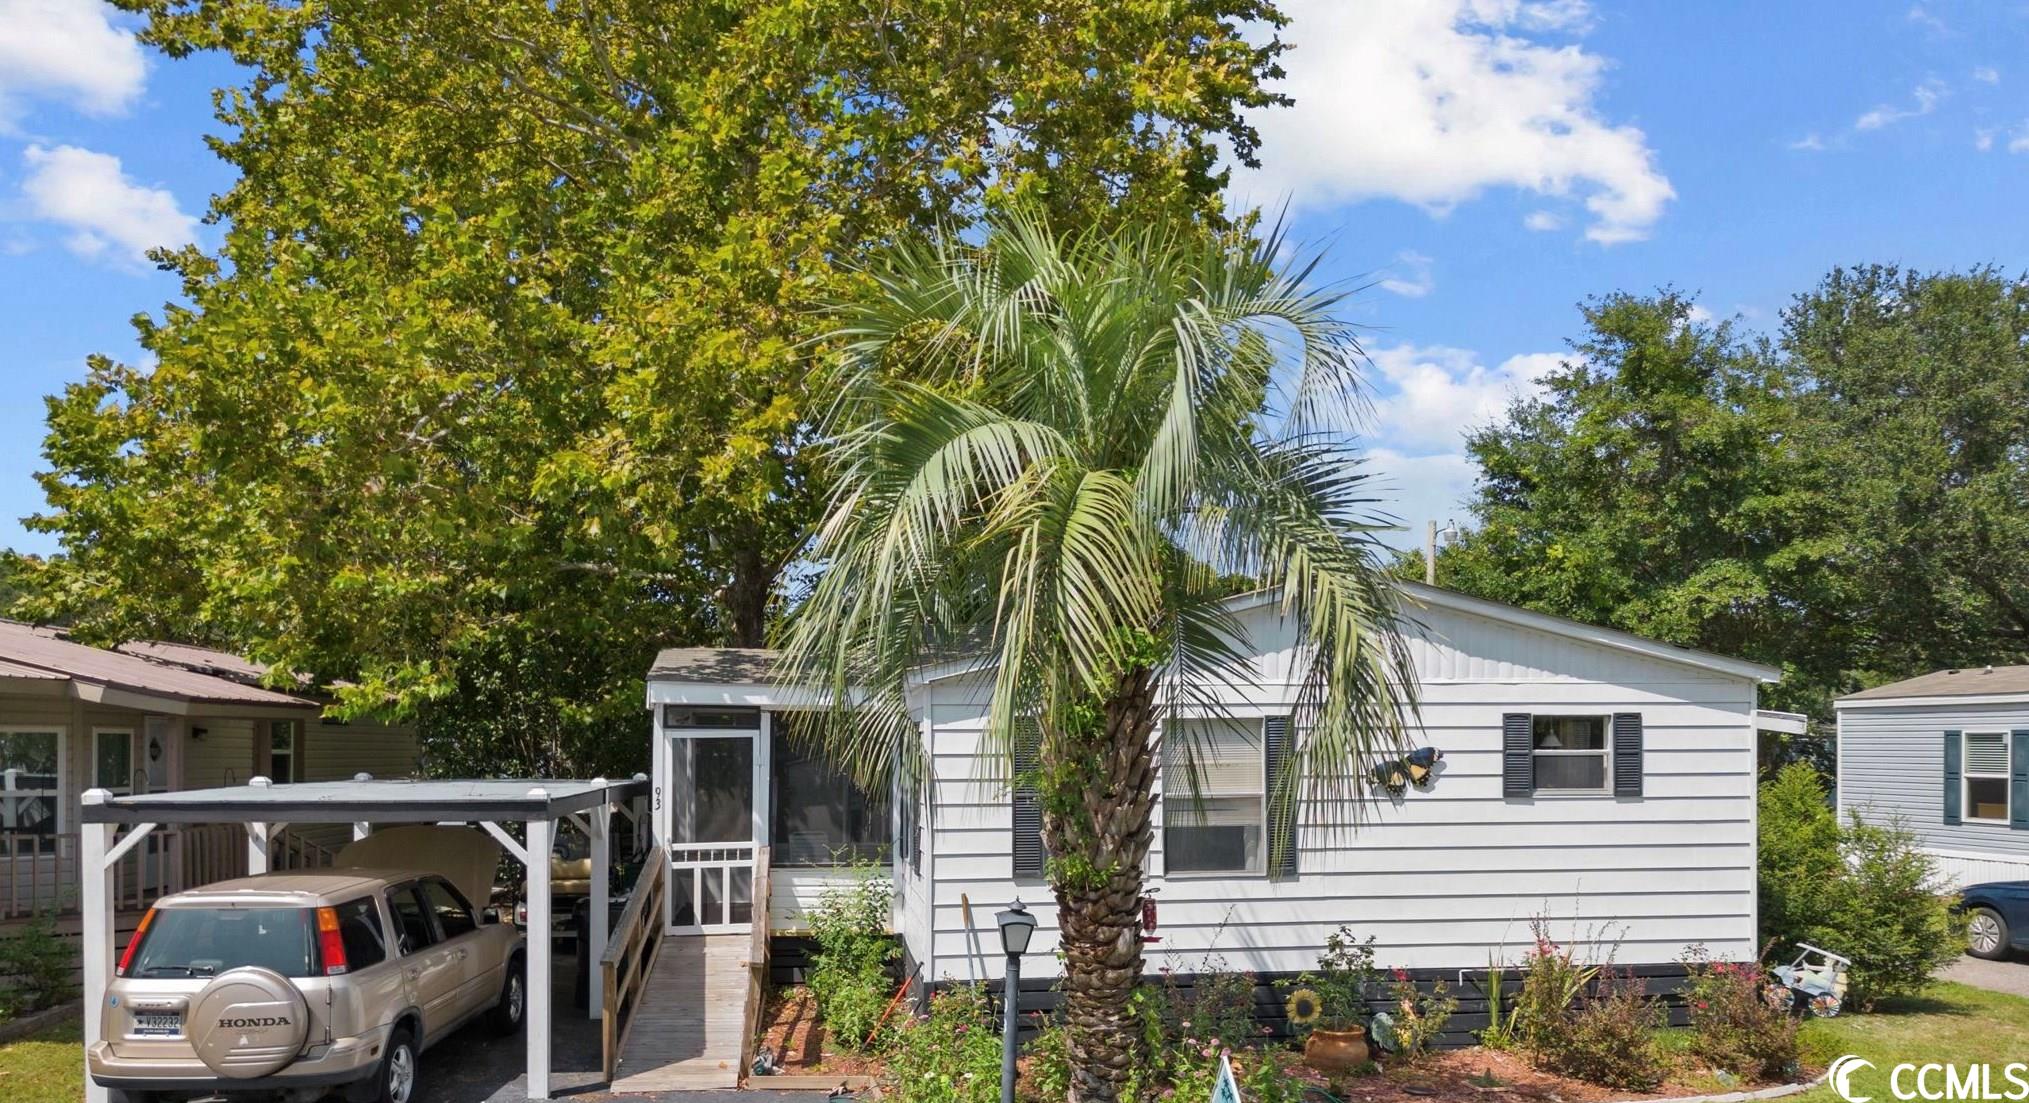 newly refurbished 3 bedroom, 2 bathroom double wide manufactured home in inlet oaks village: a vibrant 55 and older community offering a clubhouse and pool exclusively for residents and their guests. this charming residence is ideally situated near waccamaw hospital, brookgreen gardens, and the renowned murrells inlet marshwalk.  the property boasts an array of features, including a convenient carport, two inviting screened-in porches, a spacious master bedroom, a wheelchair ramp, and a modernized kitchen. positioned to face the serene pond, residents can relish picturesque sunrises each morning, creating an idyllic living environment. seller financing is available. home sold furnished.